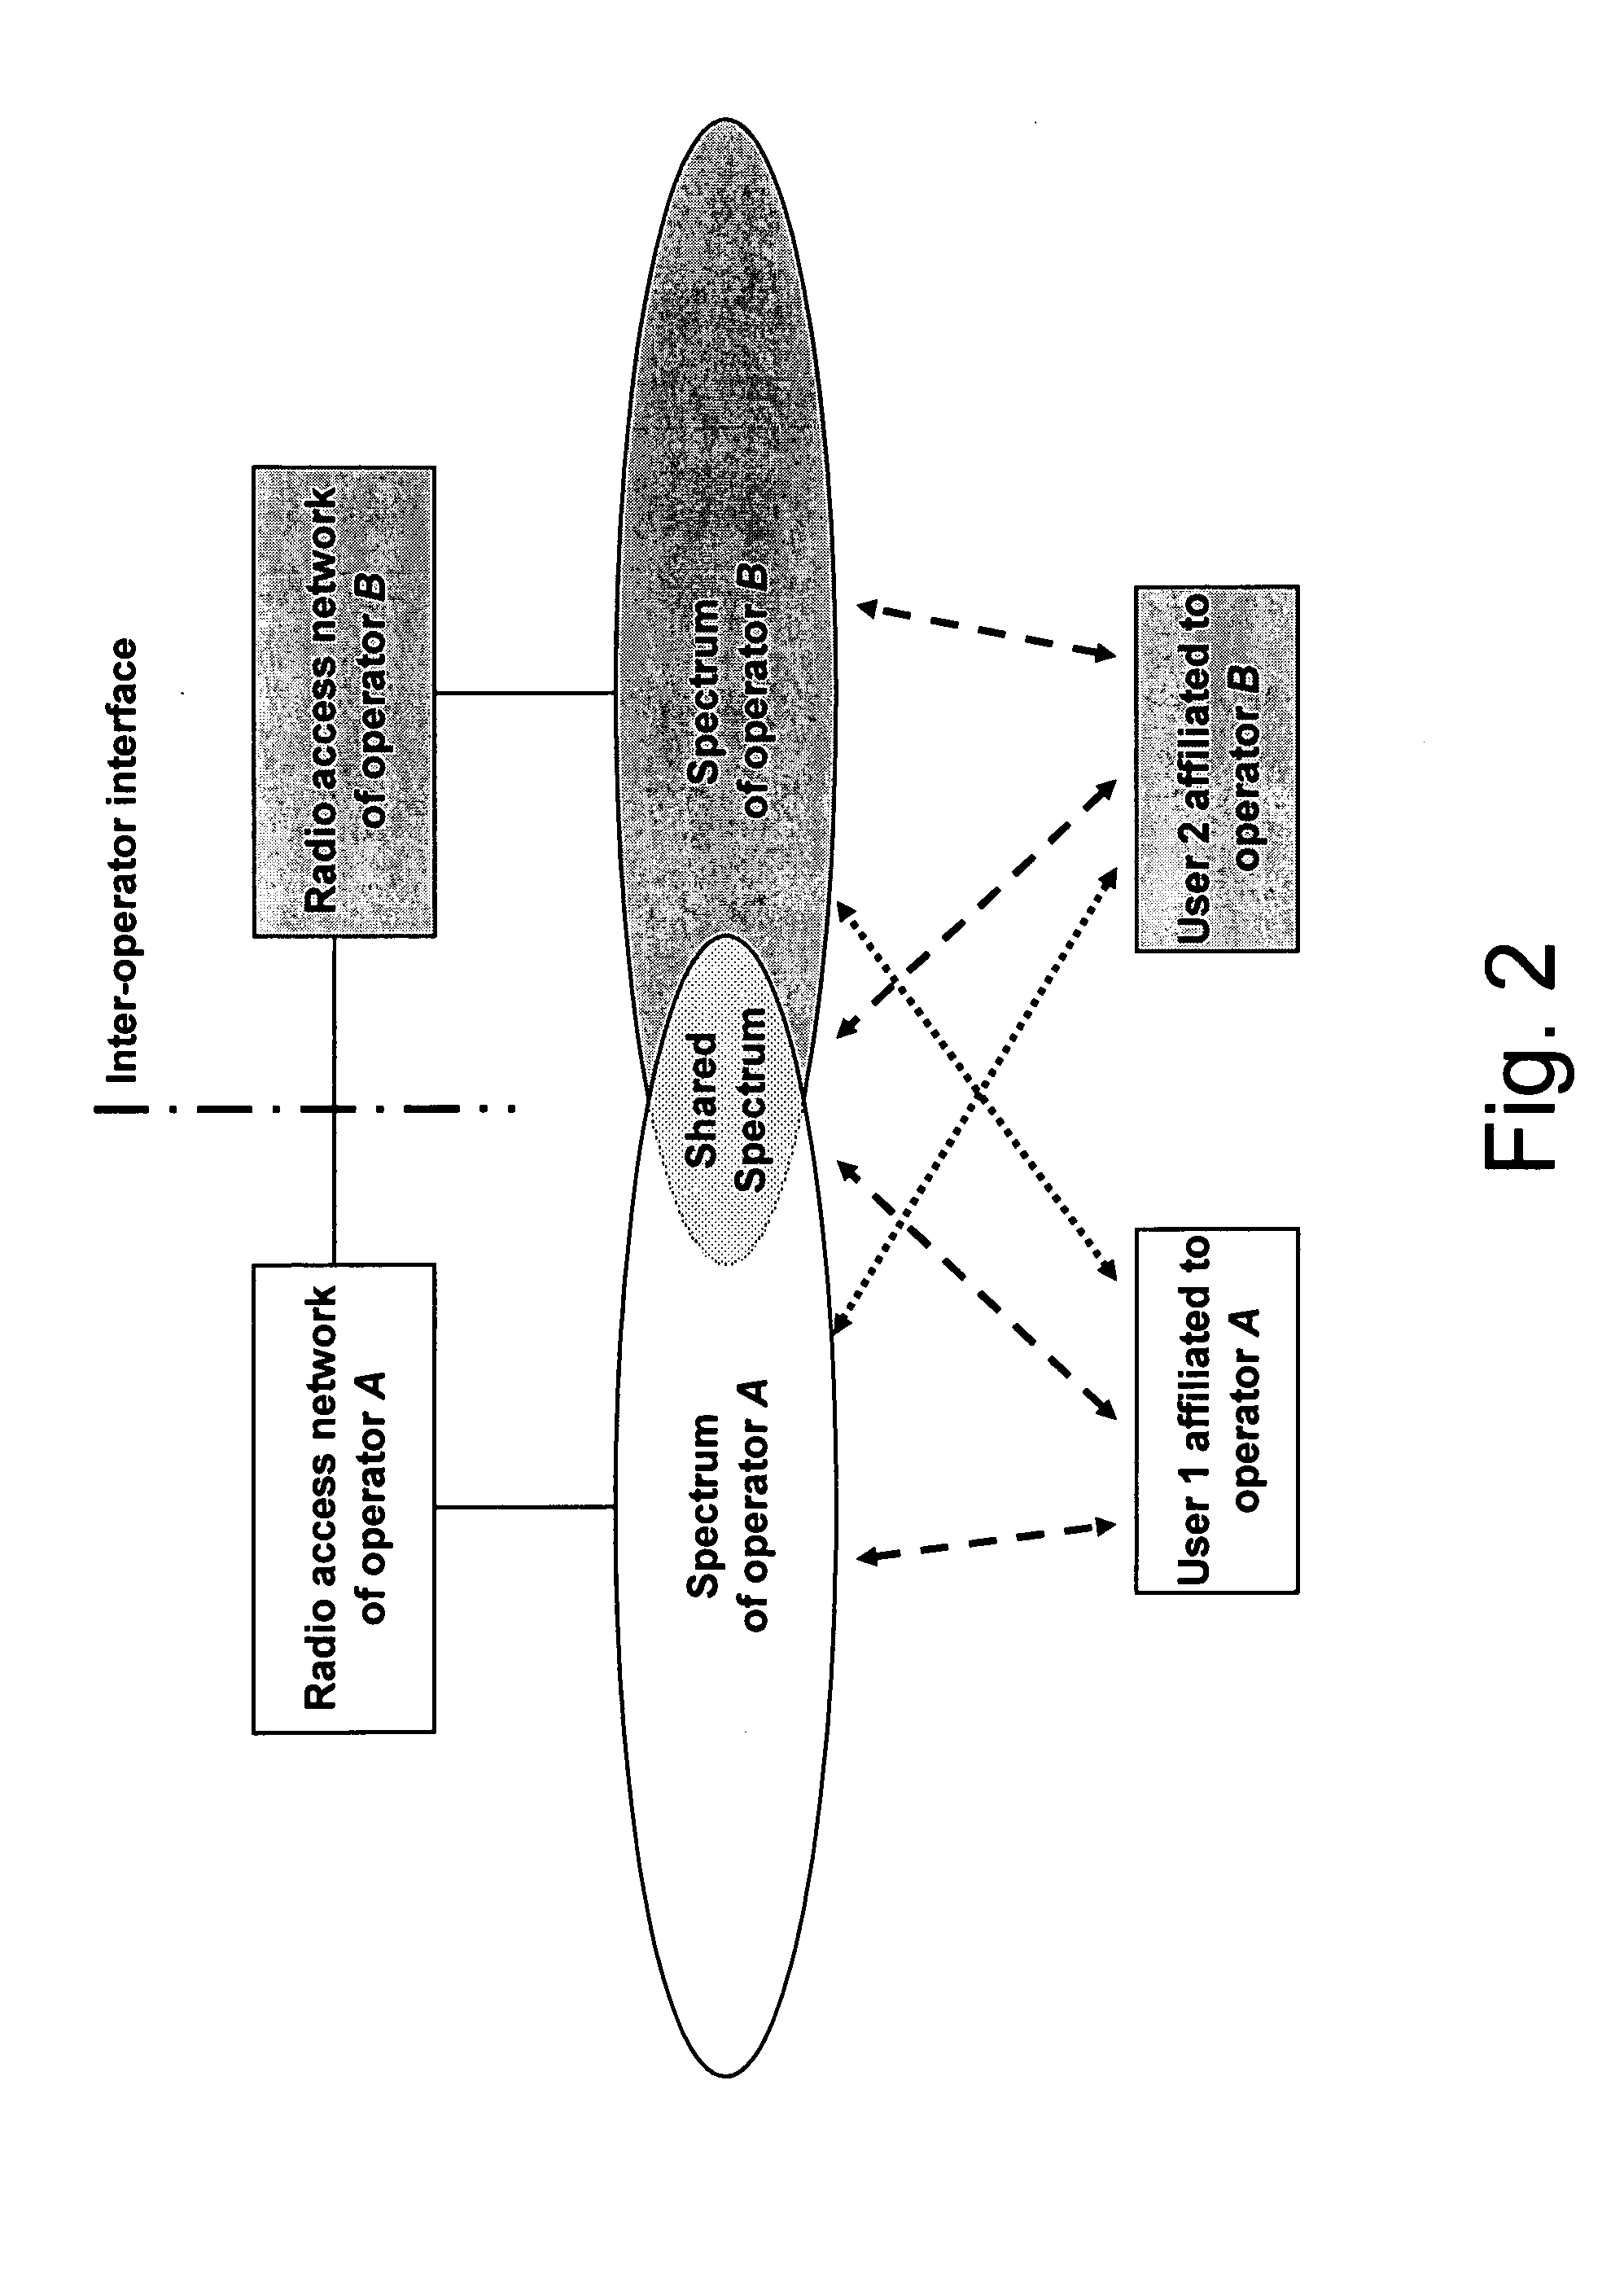 Inter-operator spectrum sharing control, inter-operator interference coordination method, and radio resource scheduling in wireless communication systems